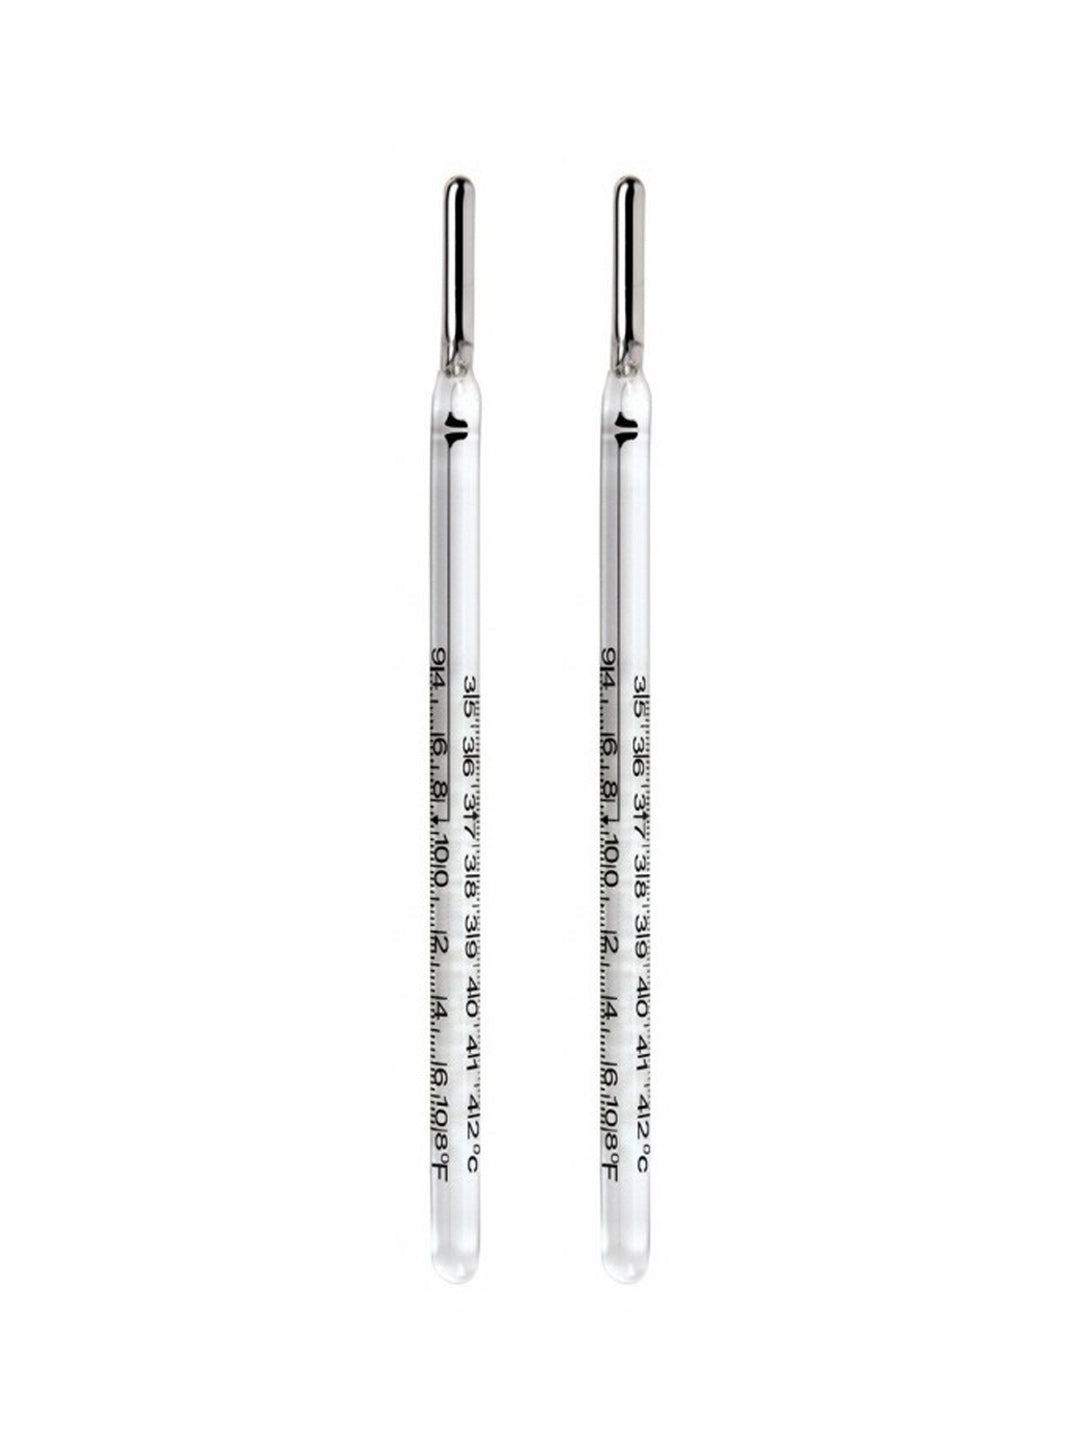 Quality Mercury Thermometer - Accurate & Reliable Measurement – Dr. Odin